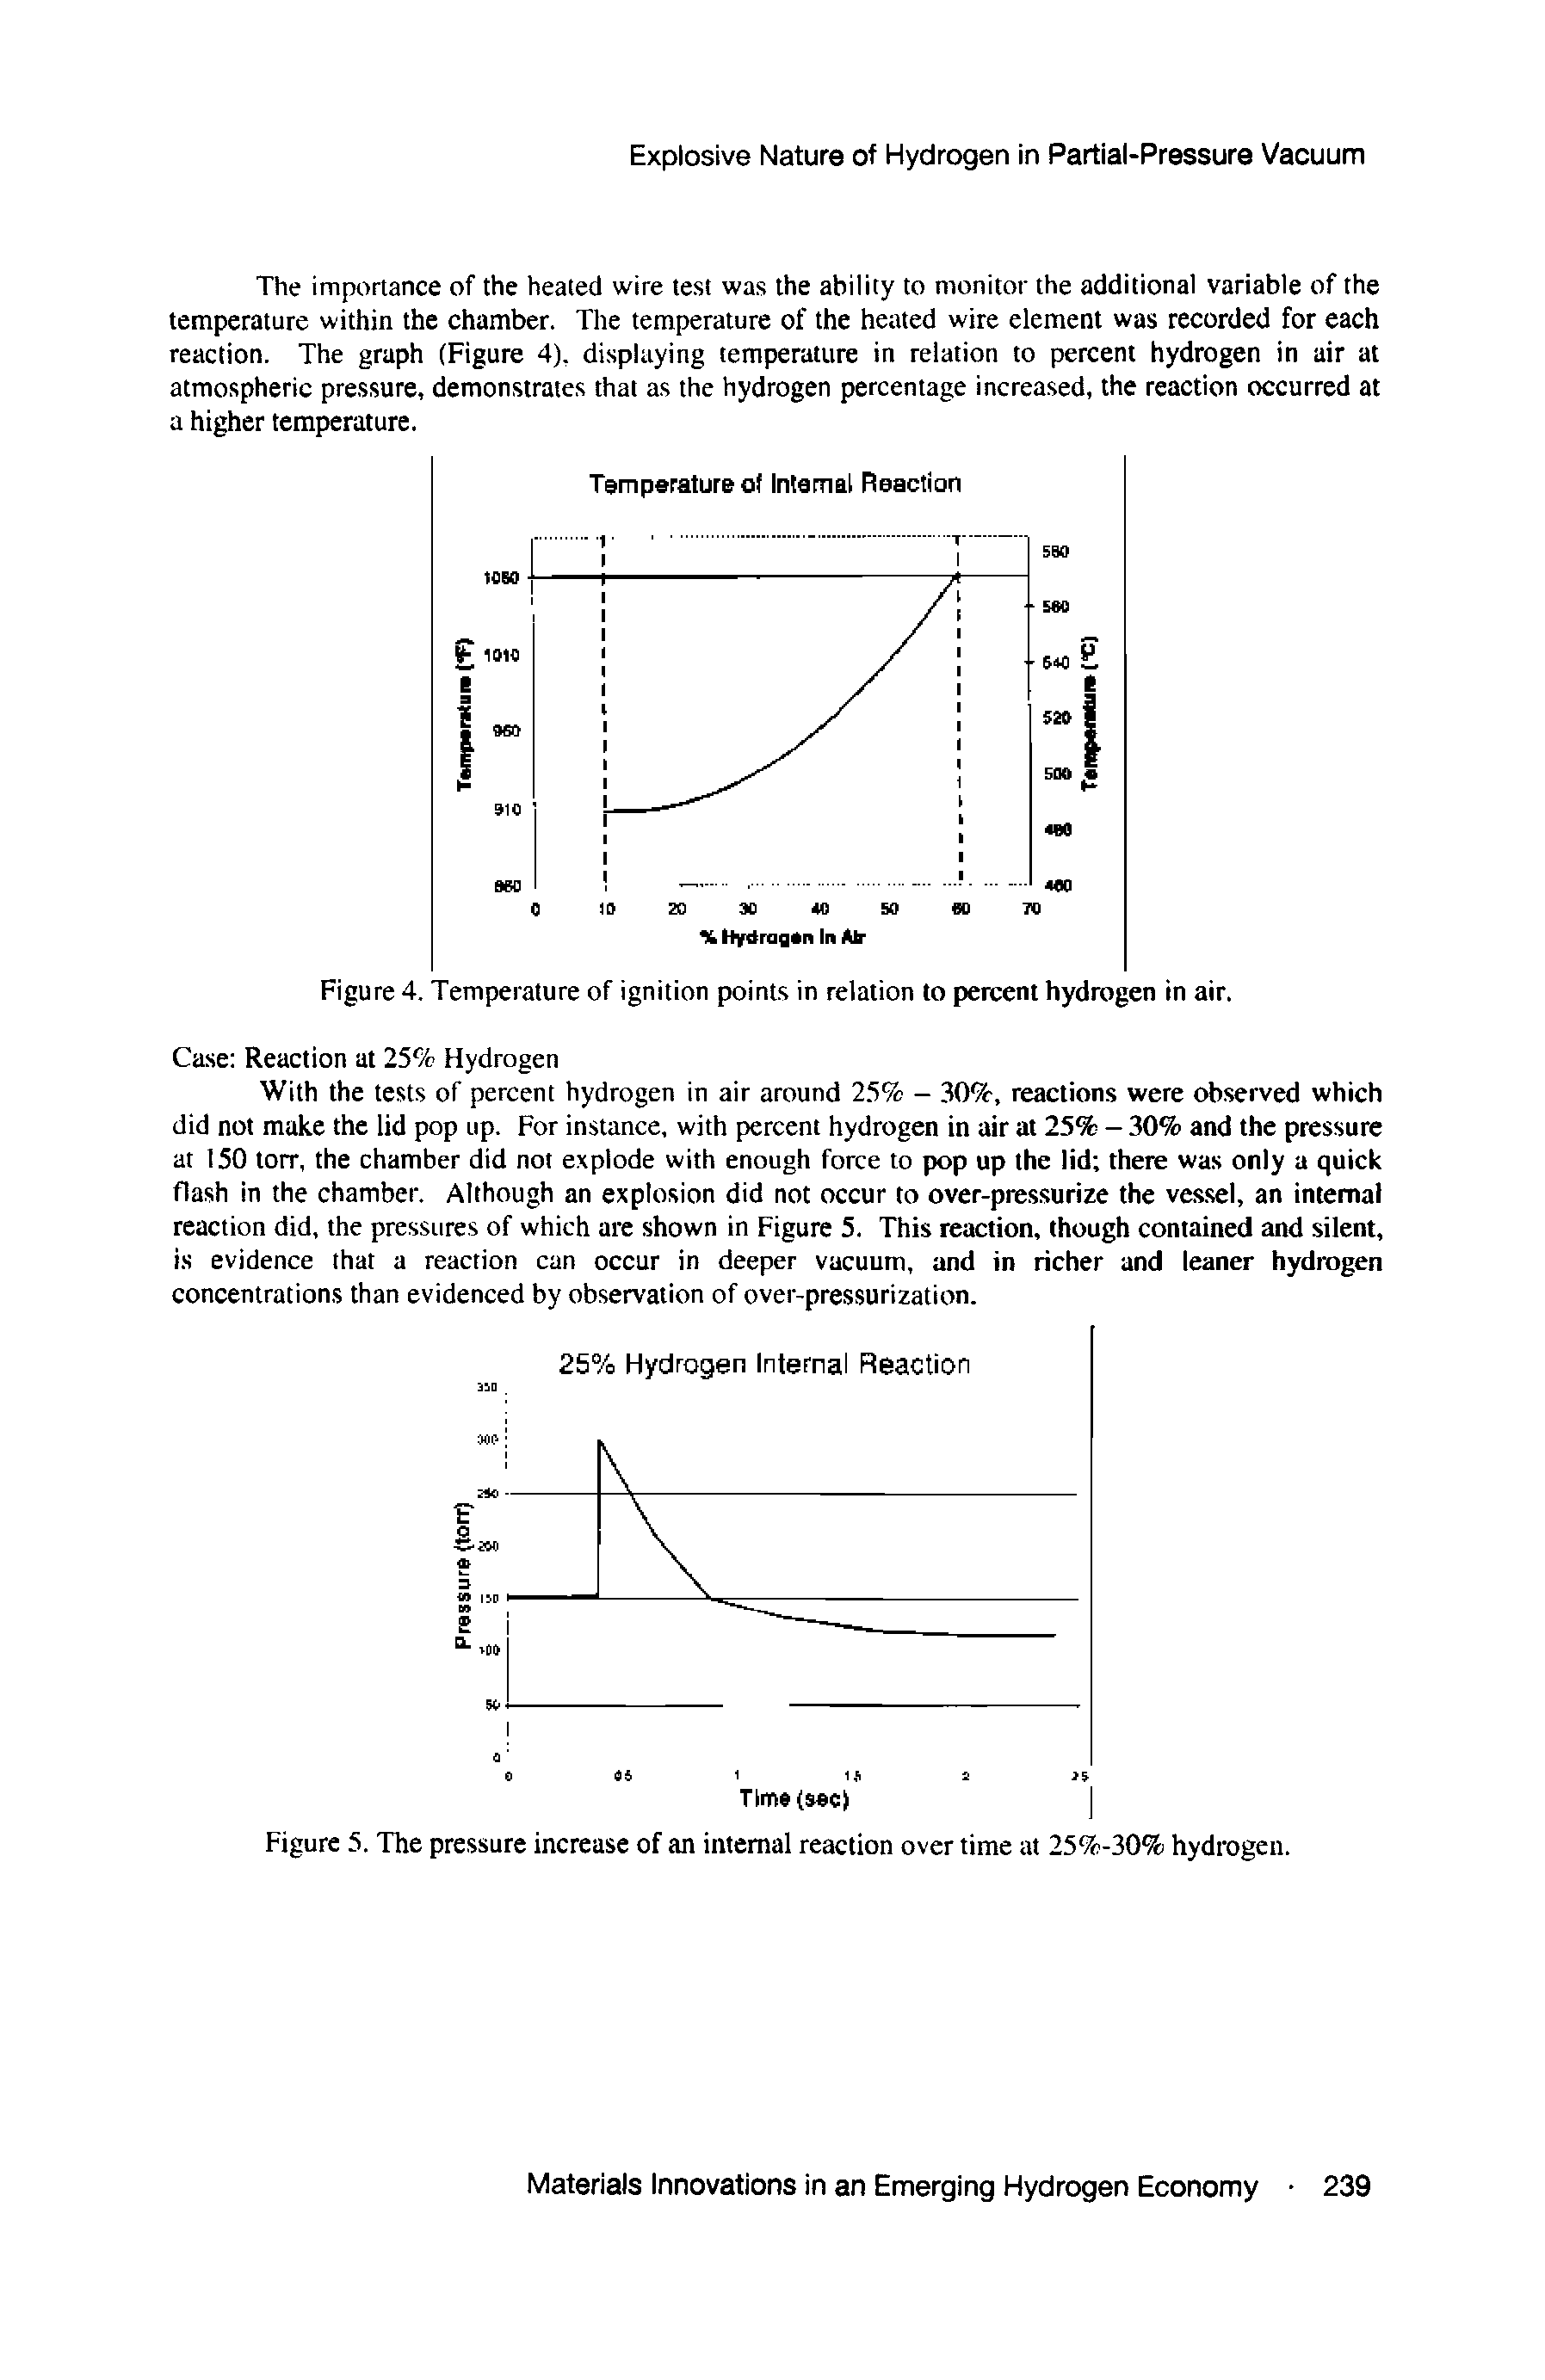 Figure 5. The pressure increase of an internal reaction over time at 25%-30% hydrogen.